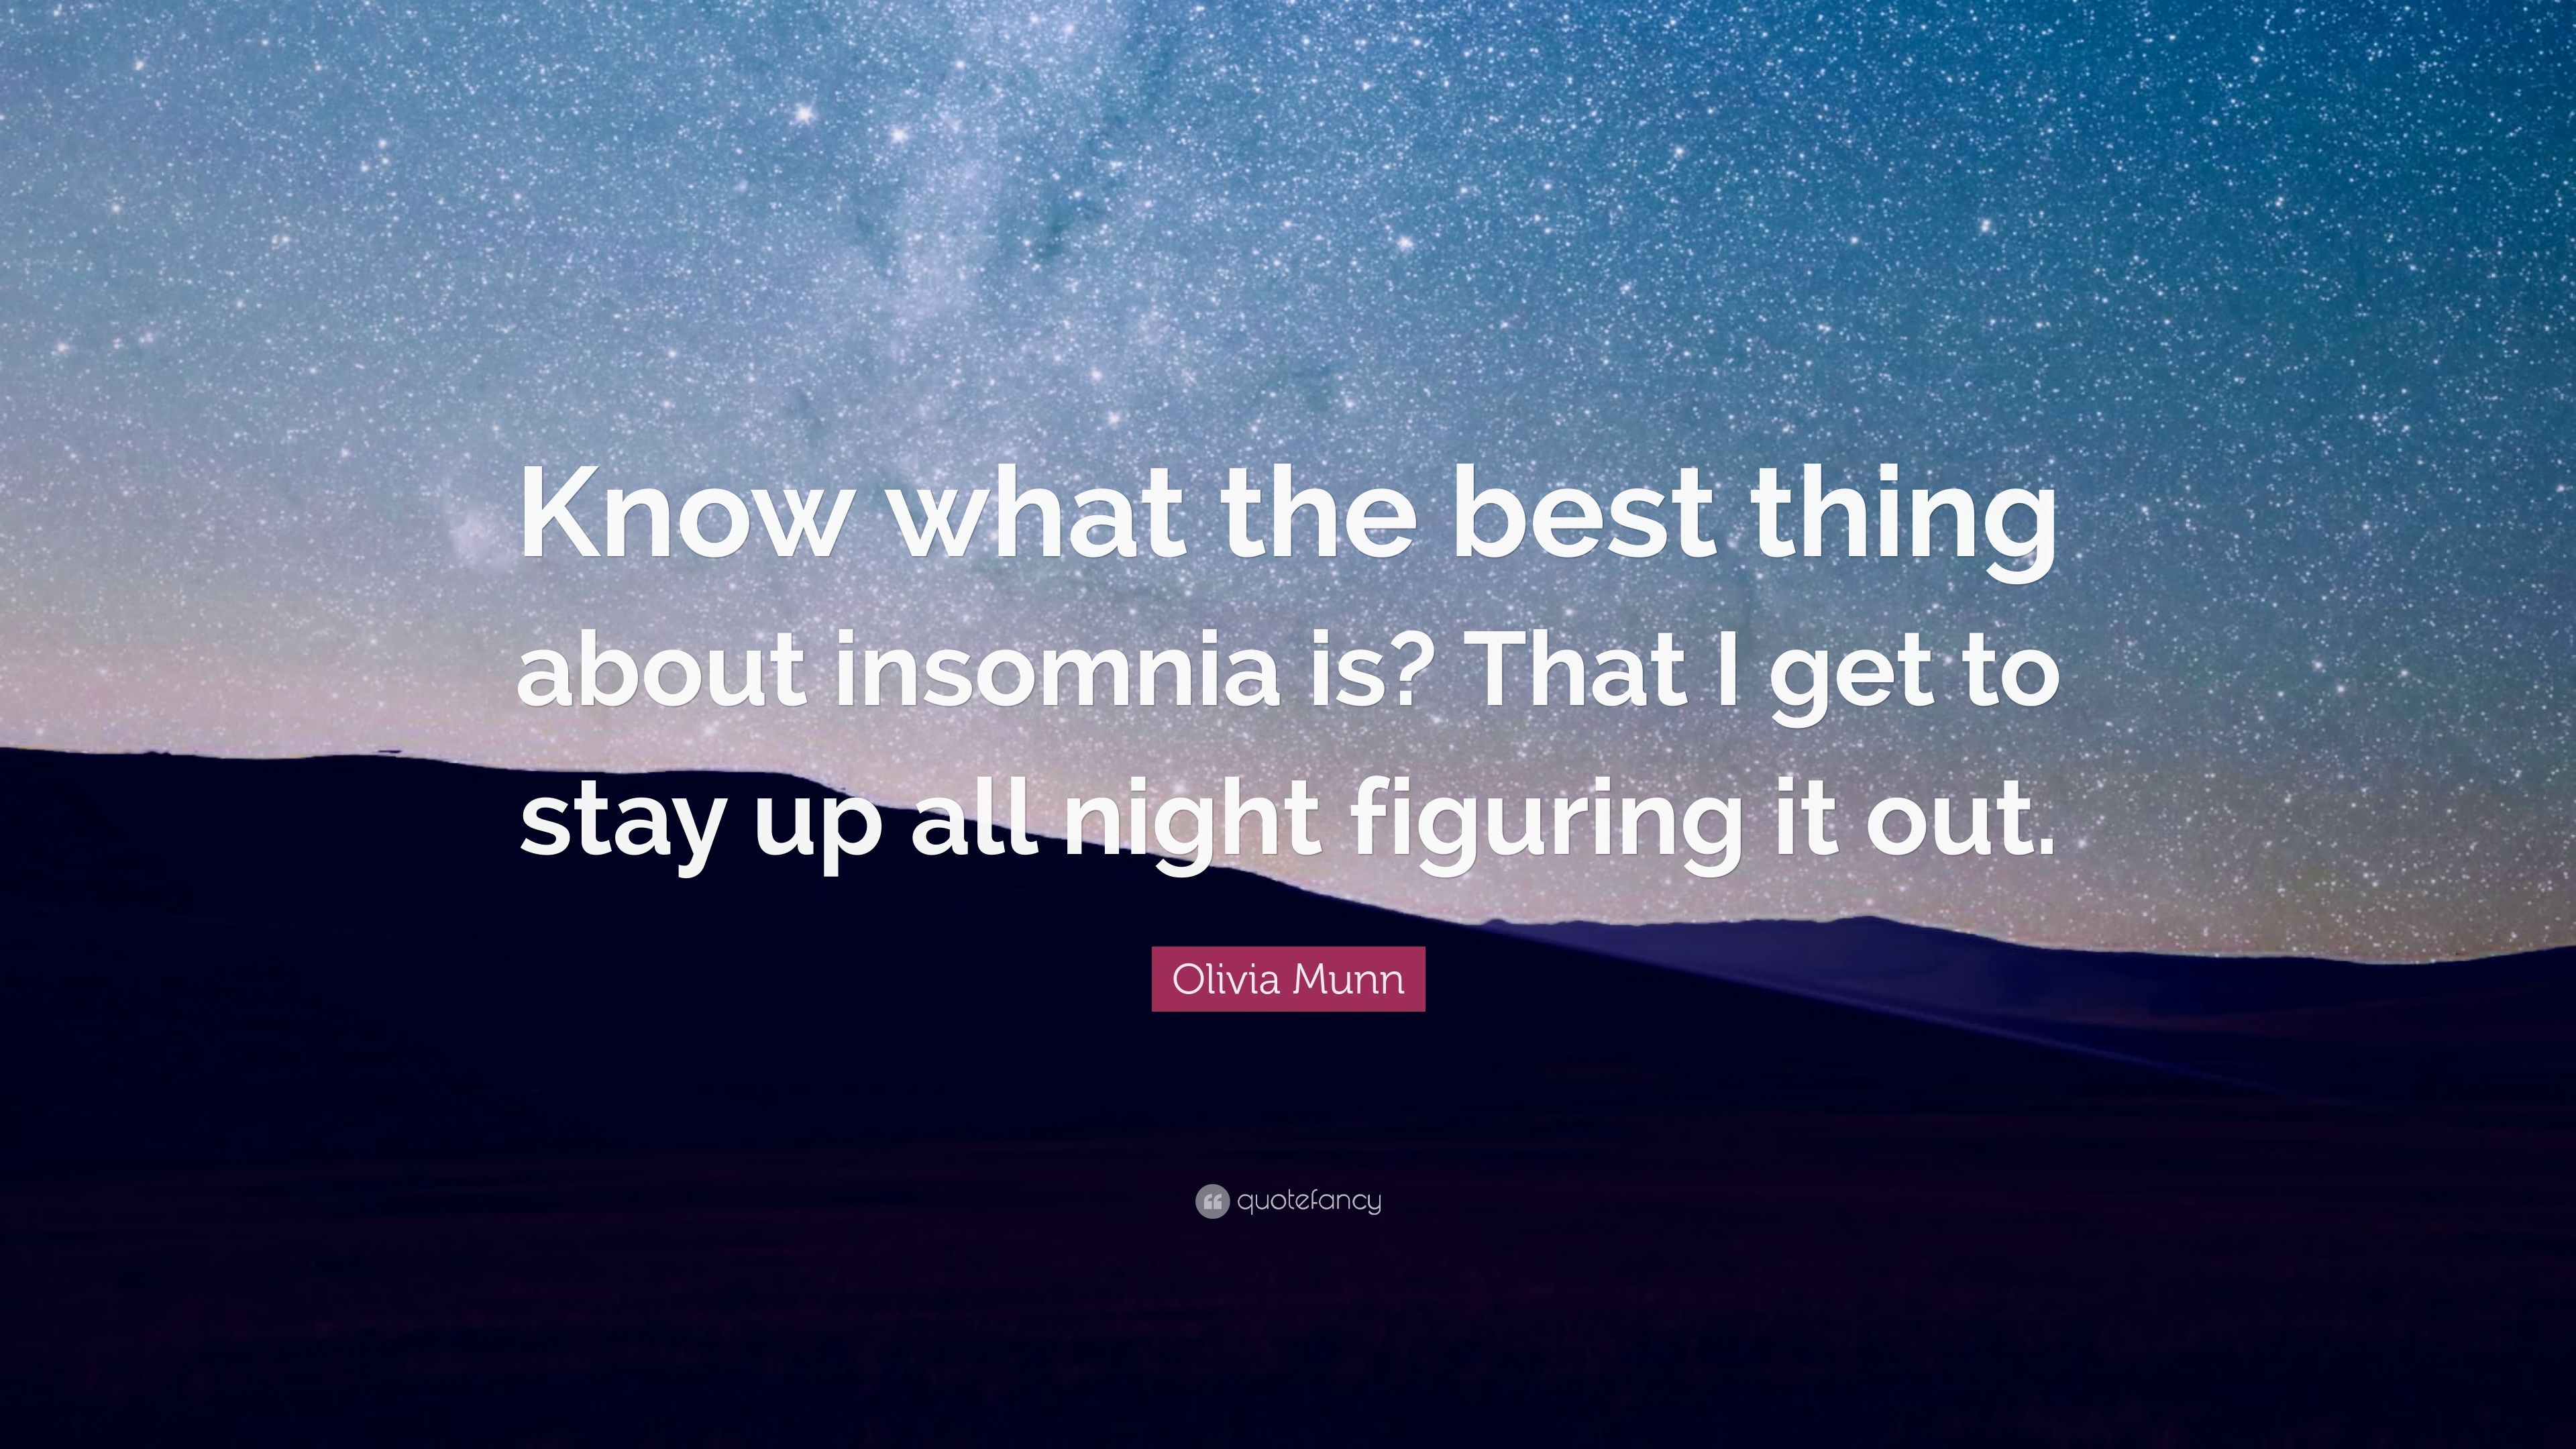 Olivia Munn Quote: “Know what the best thing about insomnia is